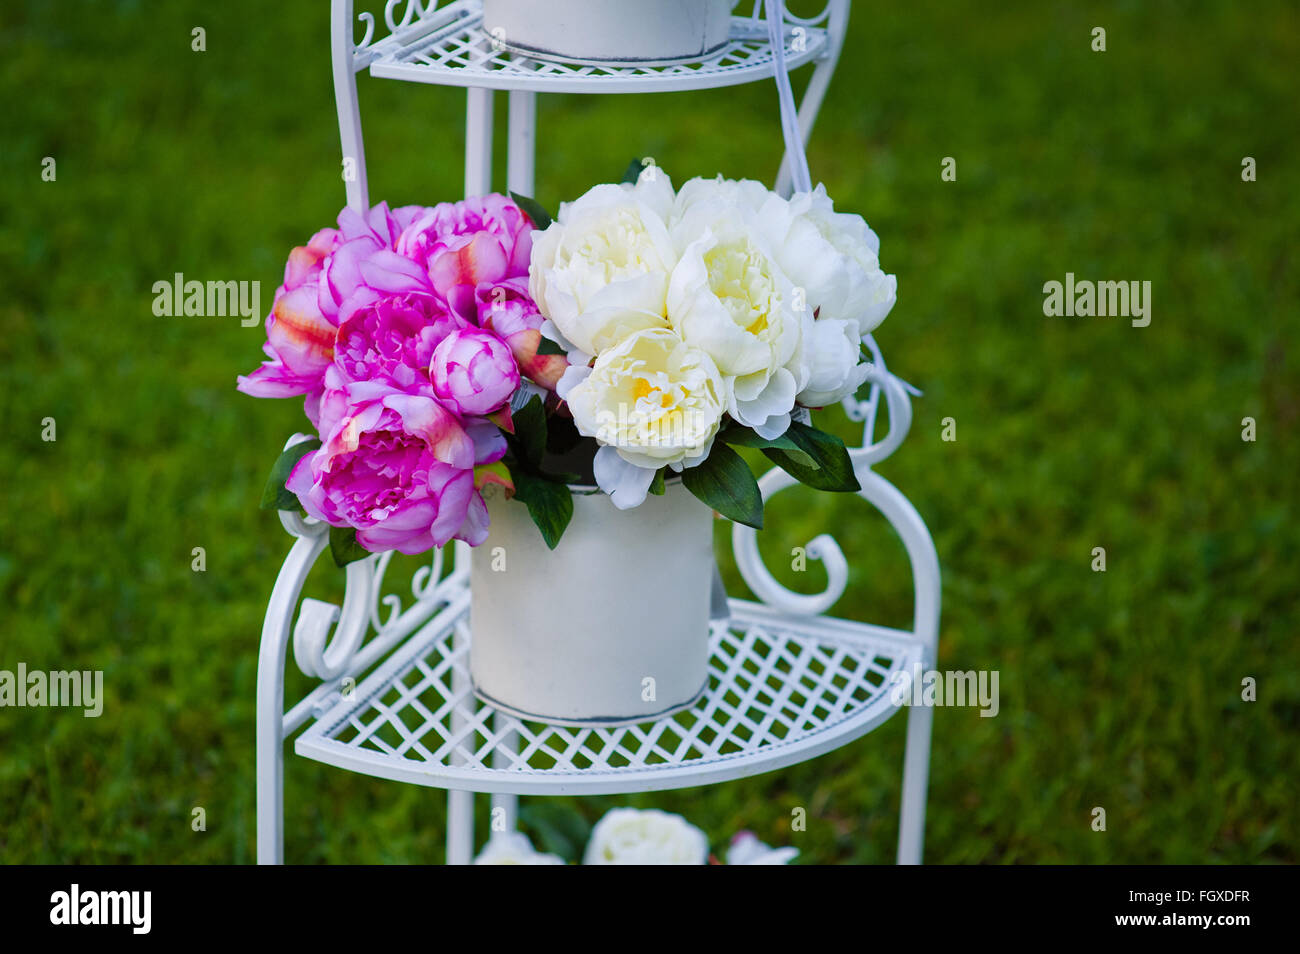 Photoshoot wedding decor in park for a loving couple Stock Photo